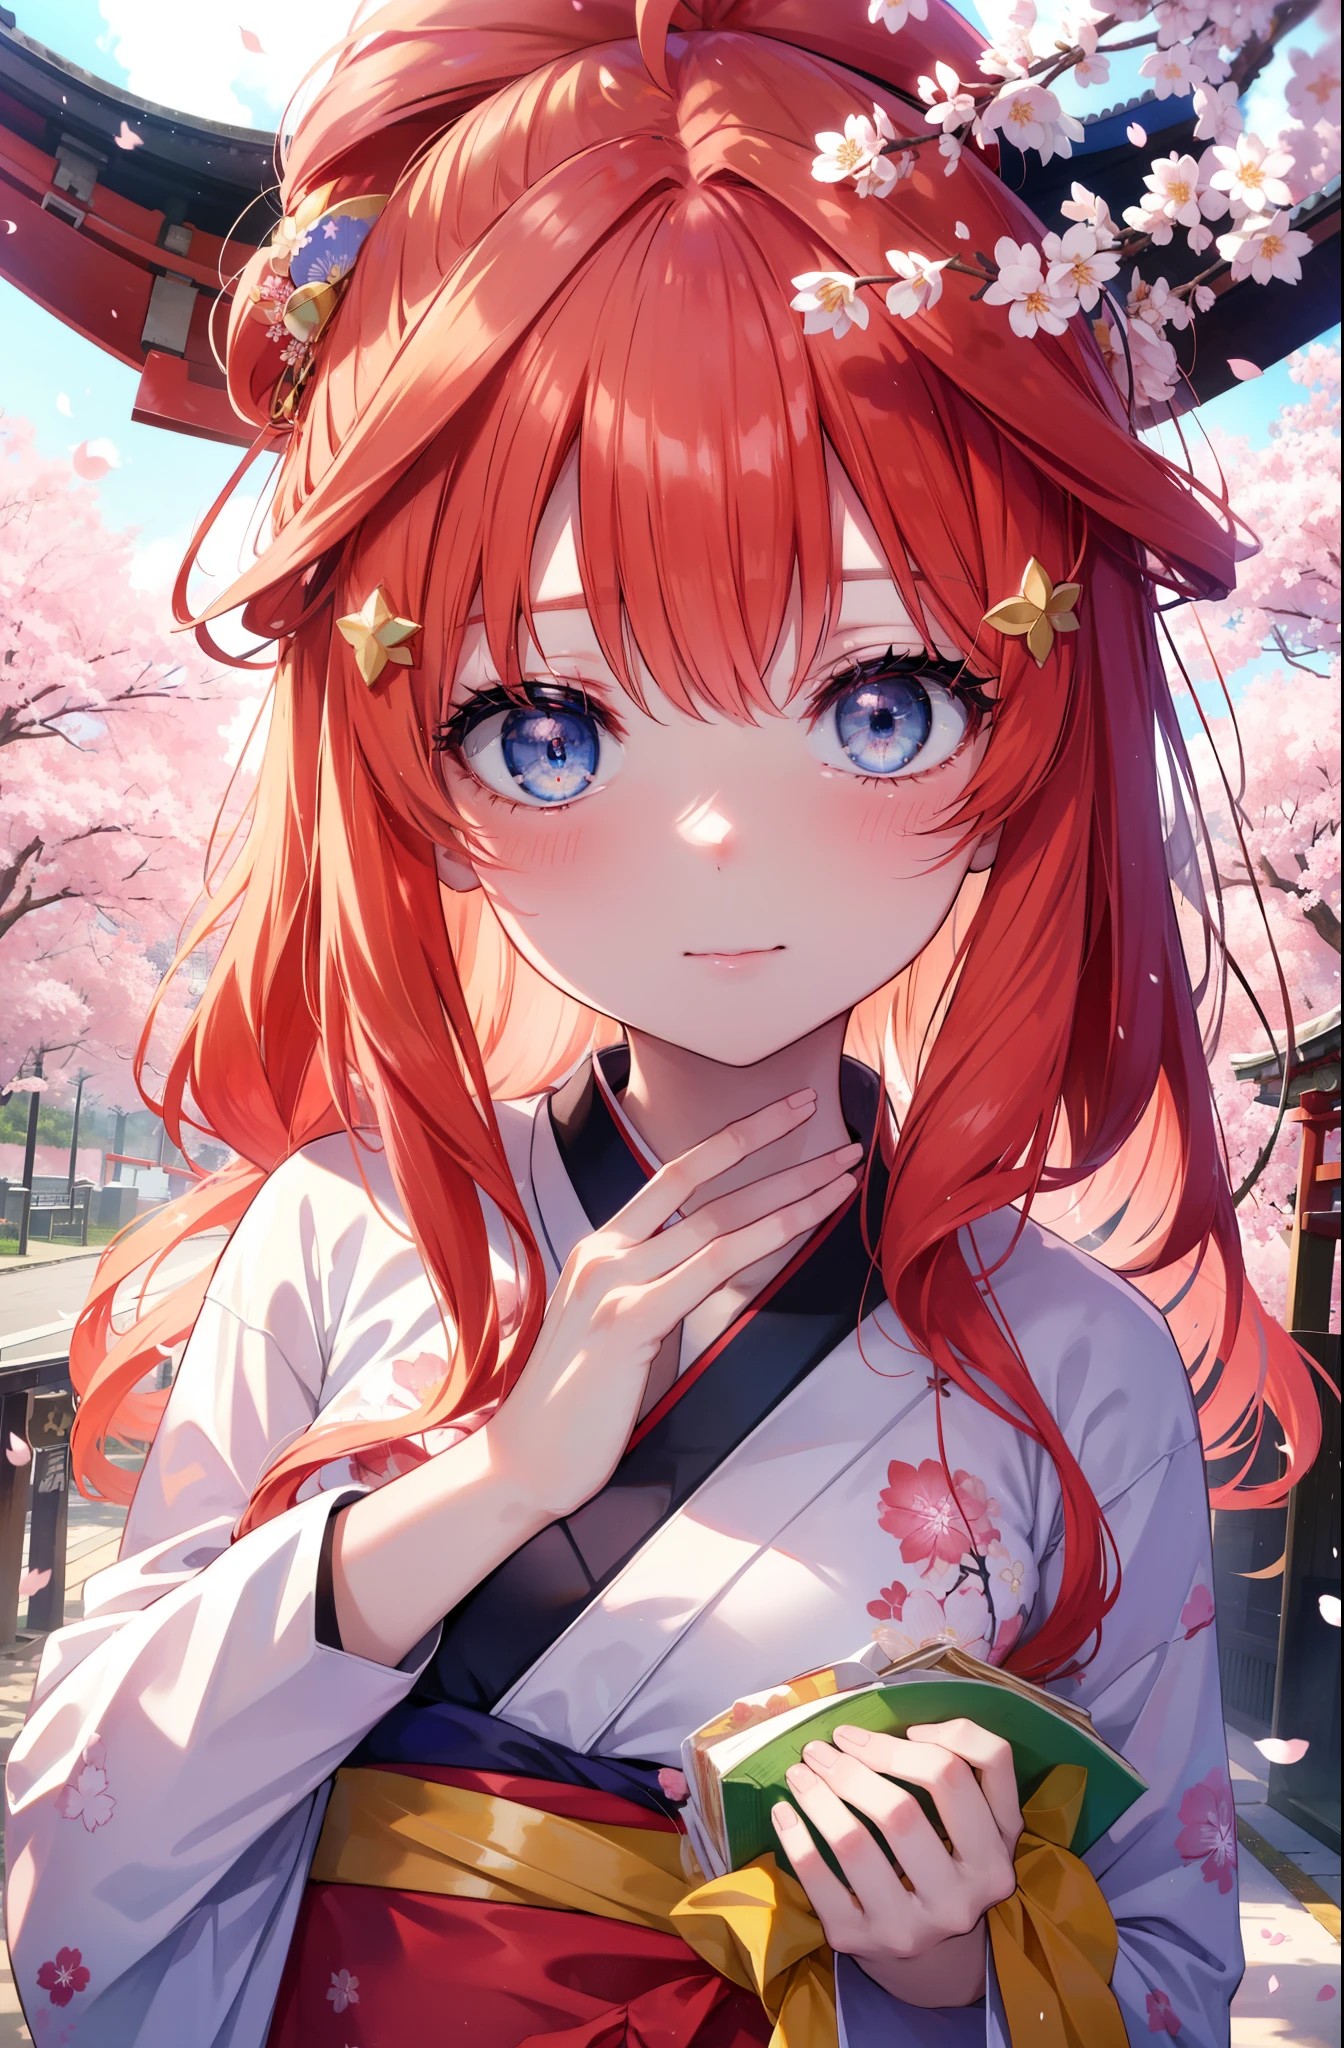 itsukinakano, Itsuki Nakano, bangs, blue eyes, hair between eyes, Ahoge,hair tied back,,long hair, redhead, star \(symbol\), hair ornaments, star hair ornaments,smile,blush,Gorgeous kimono with red floral pattern,white foot bag,Zori cherry blossoms are blooming,Cherry blossoms are scattered,Cherry blossom tree-lined path,
break outdoors, shrine,torii,
break (masterpiece:1.2), highest quality, High resolution, unity 8k wallpaper, (figure:0.8), (detailed and beautiful eyes:1.6), highly detailed face, perfect lighting, Very detailed CG, (perfect hands, perfect anatomy),